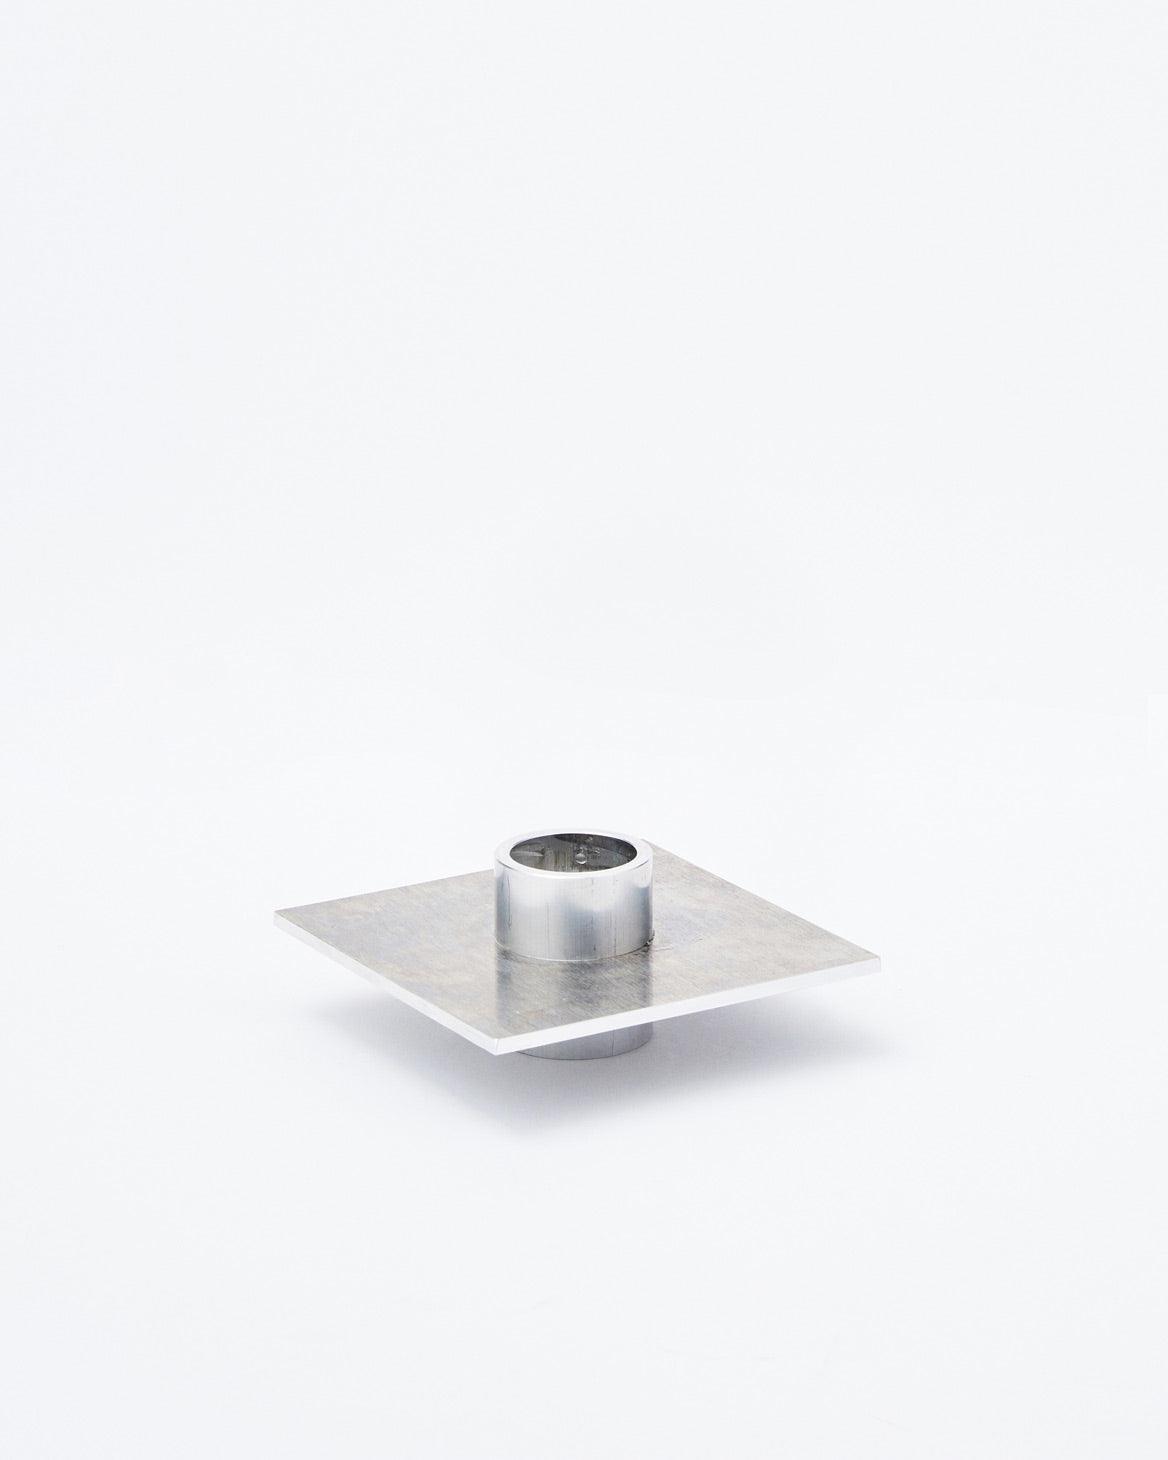 White background, Aluminium Candlestick P-L series in inclined position 